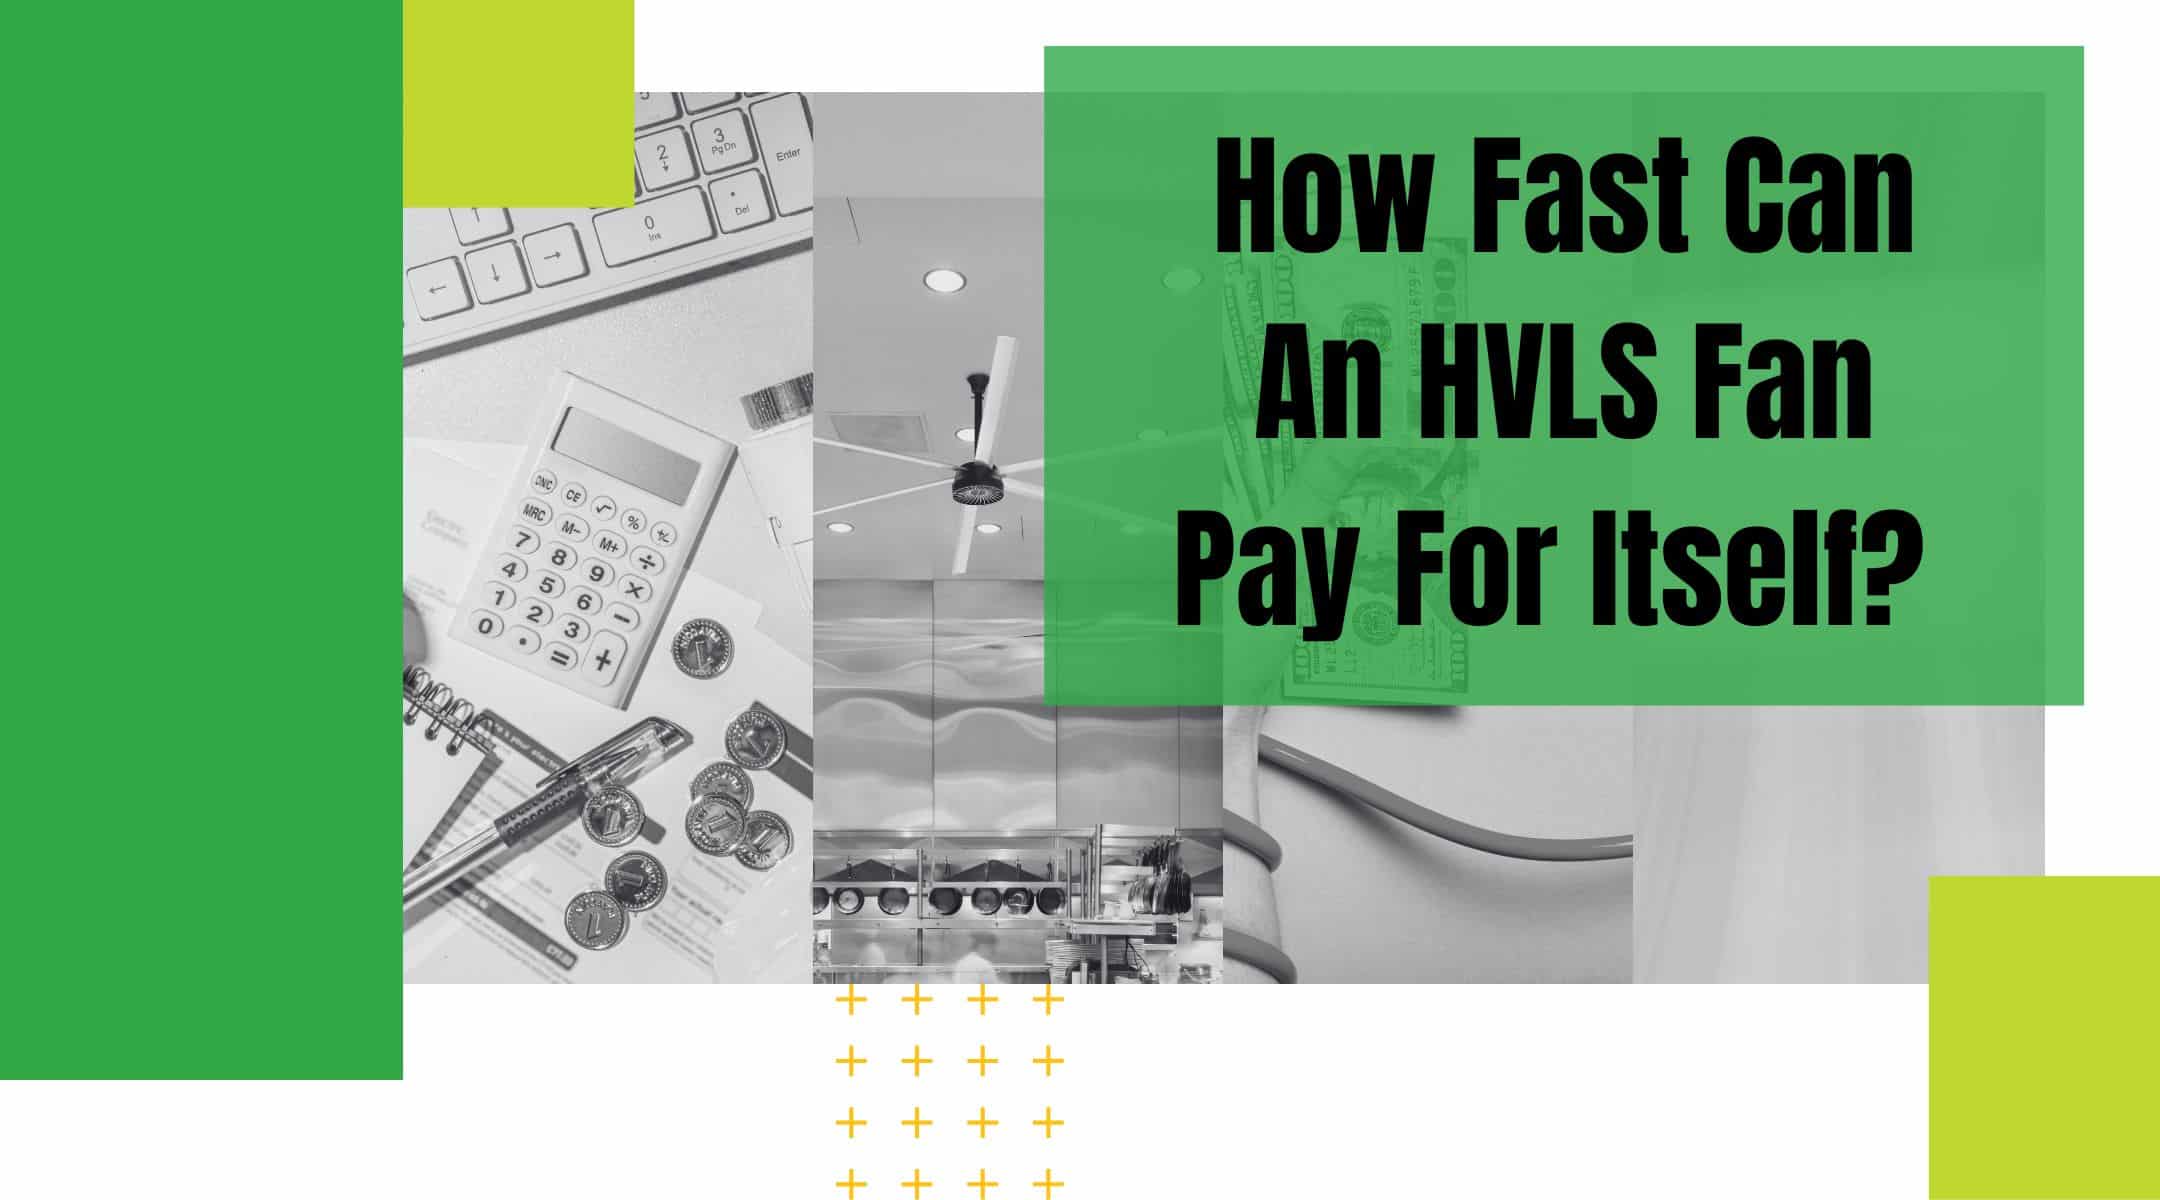 How Fast Can an HVLS Fan Pay for Itself?